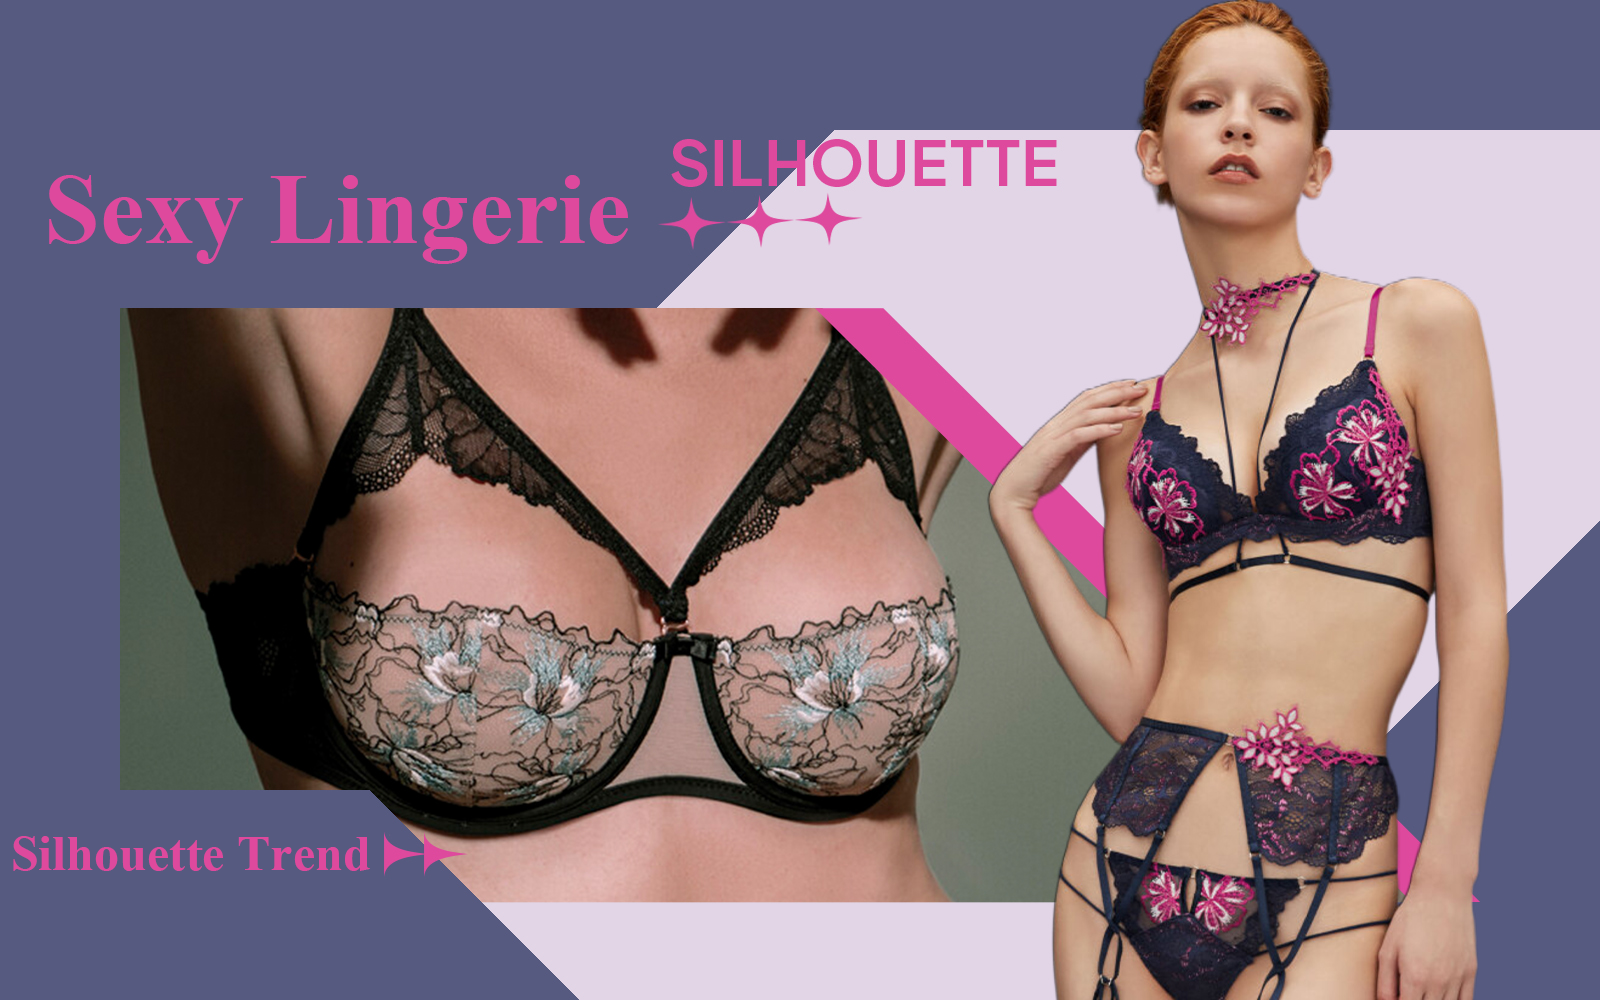 Sexy Structure -- The Silhouette Trend for Women's Lingerie